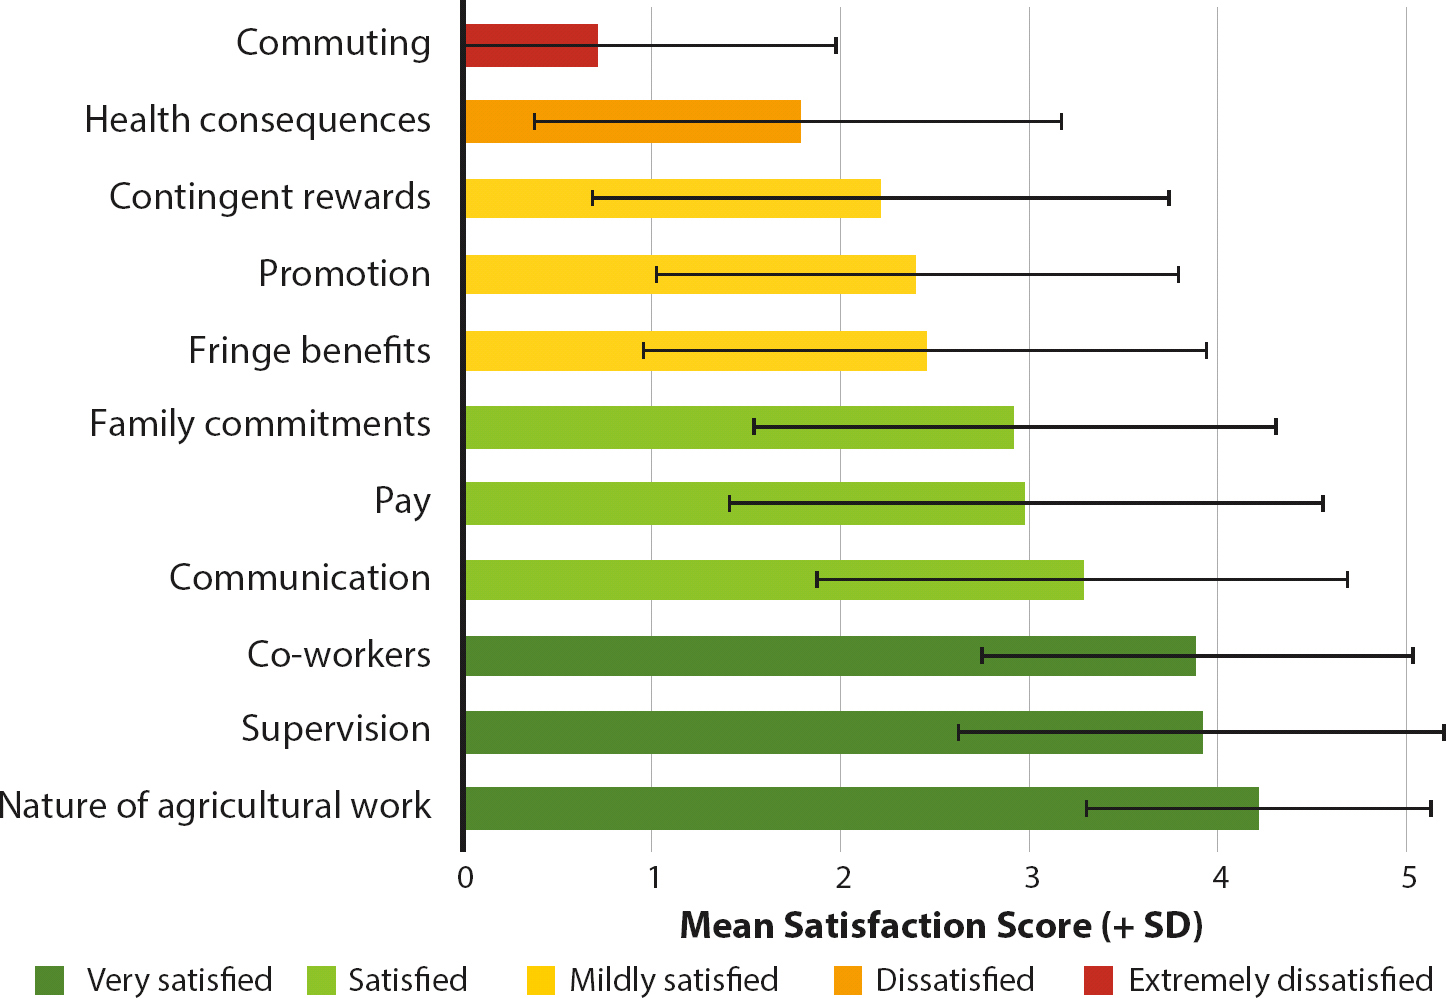 Mean (+ SD) job satisfaction scores for 611 crew members who participated in the 2018 survey.